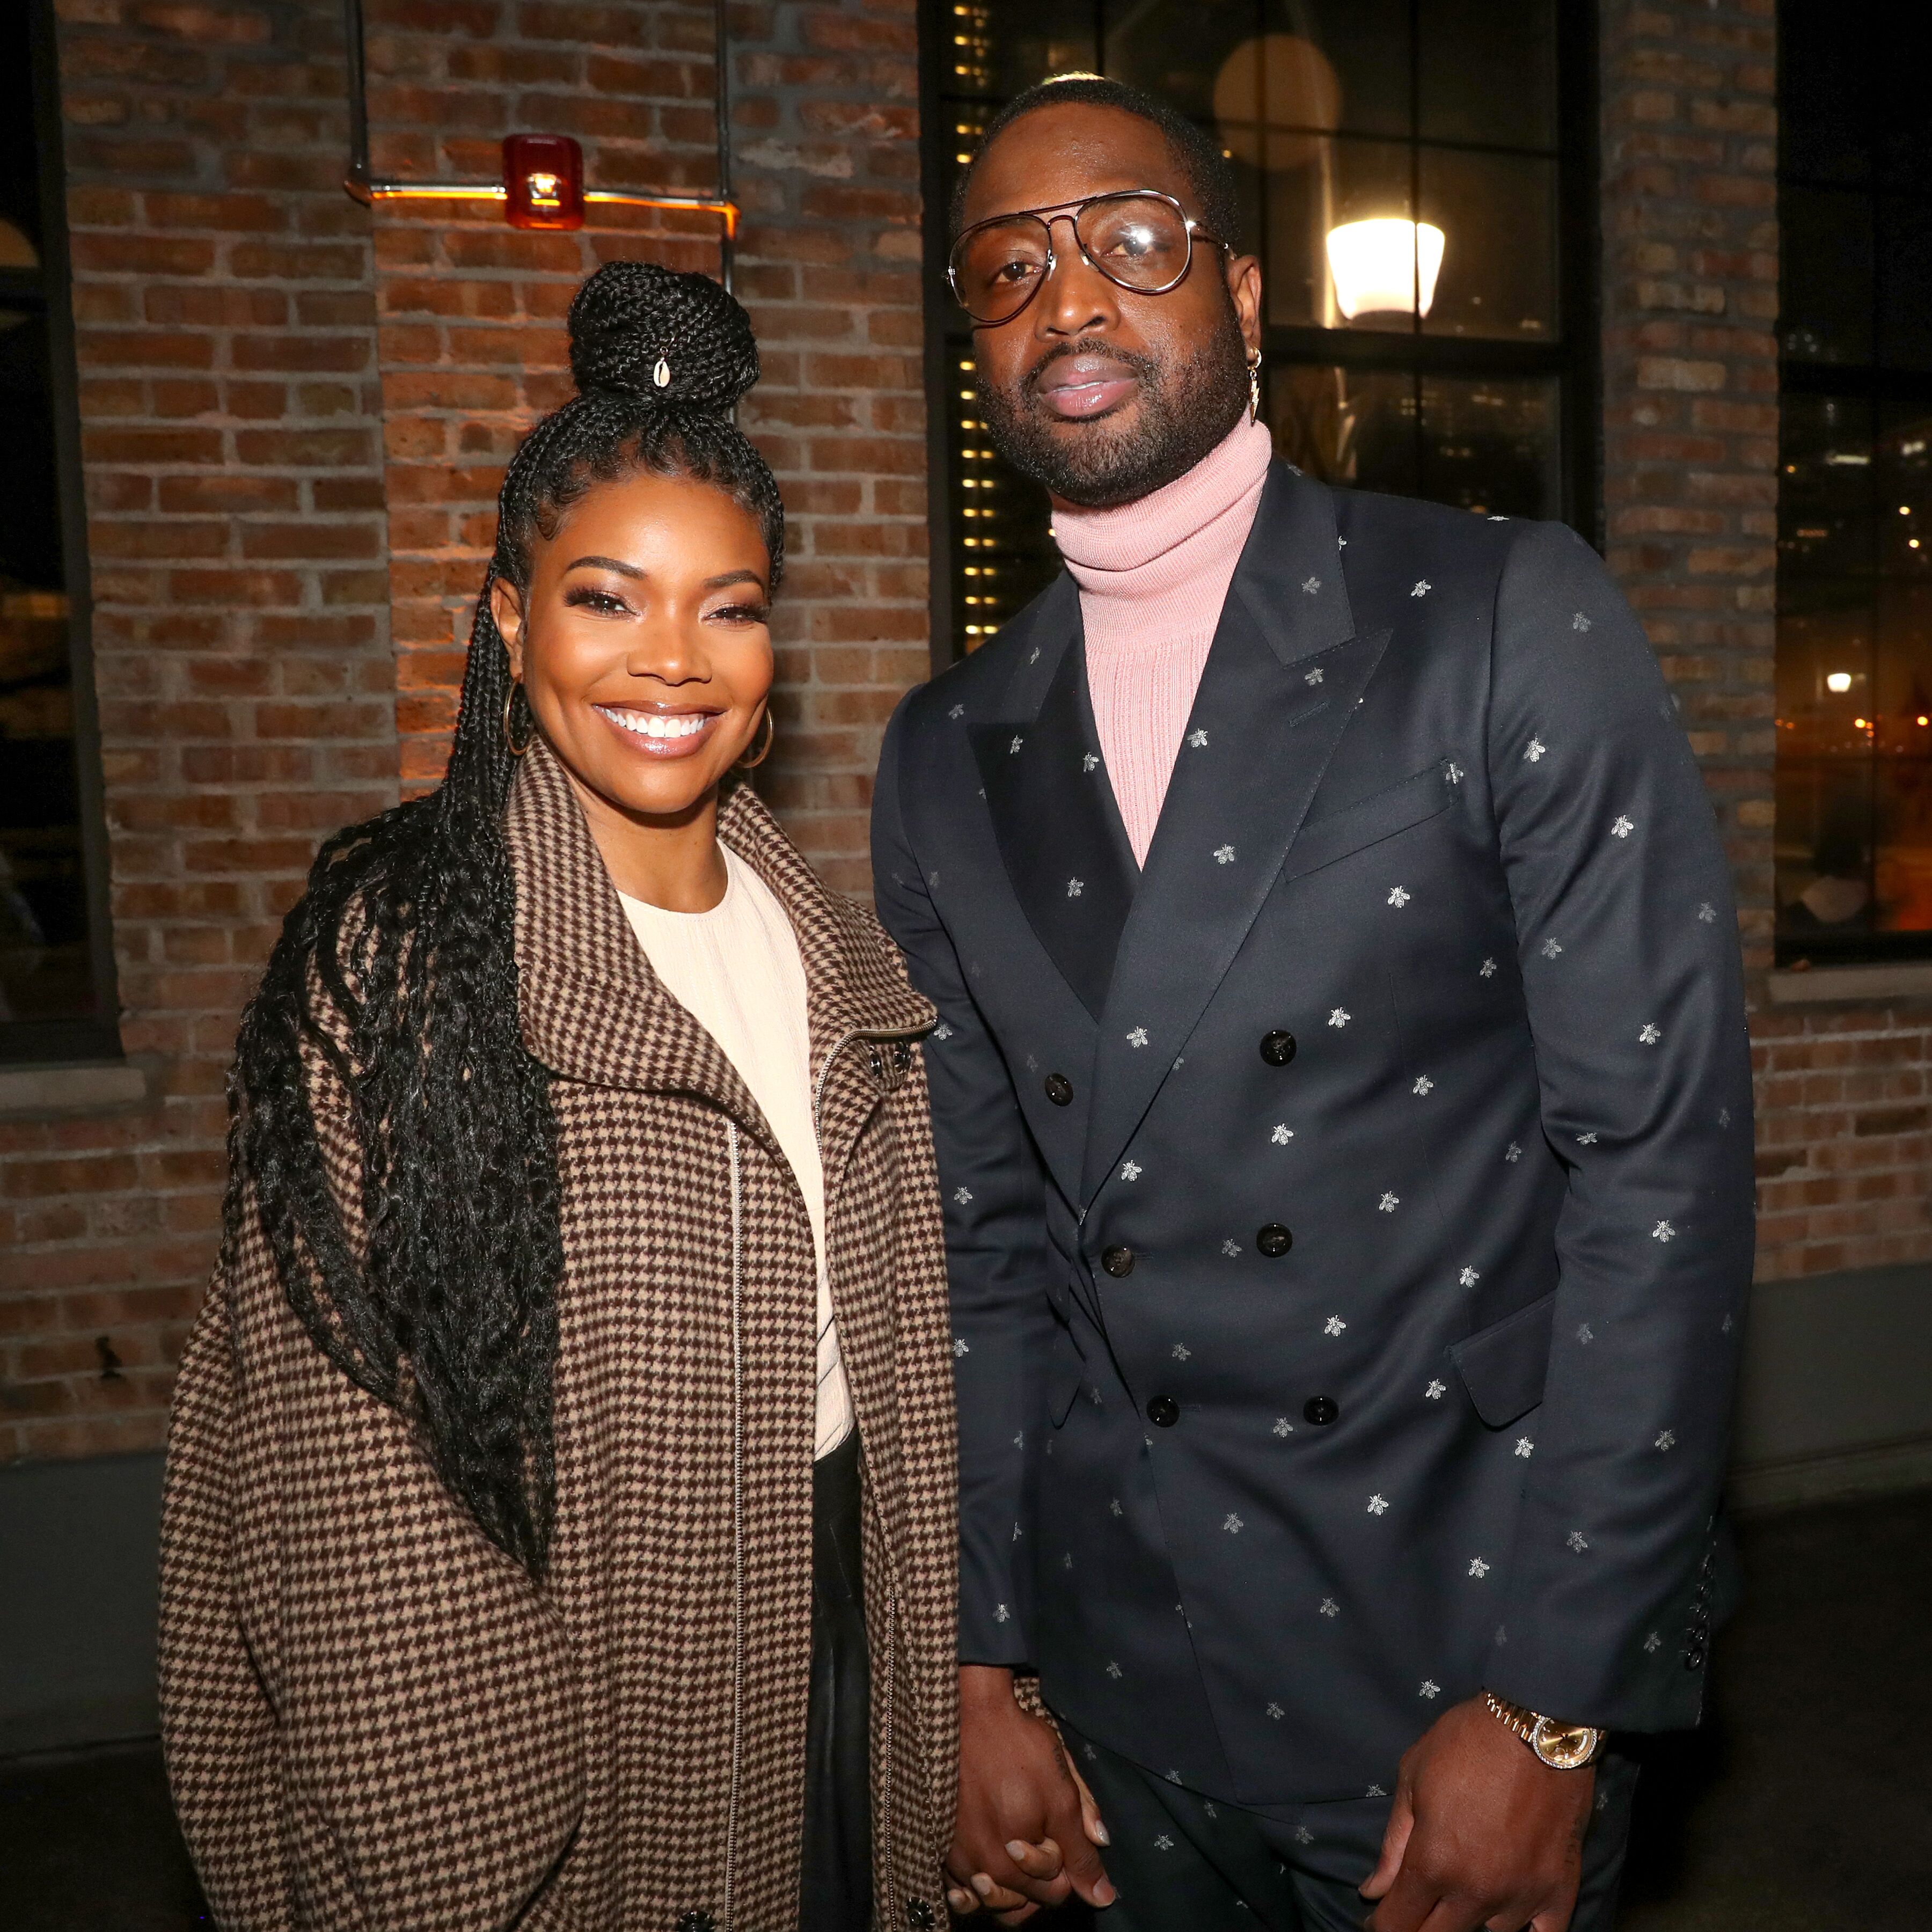 Gabrielle Union and Dwyane Wade attend Stance Spades At NBA All-Star 2020 at City Hall on February 15, 2020 in Chicago, Illinois | Photo: Getty Images 